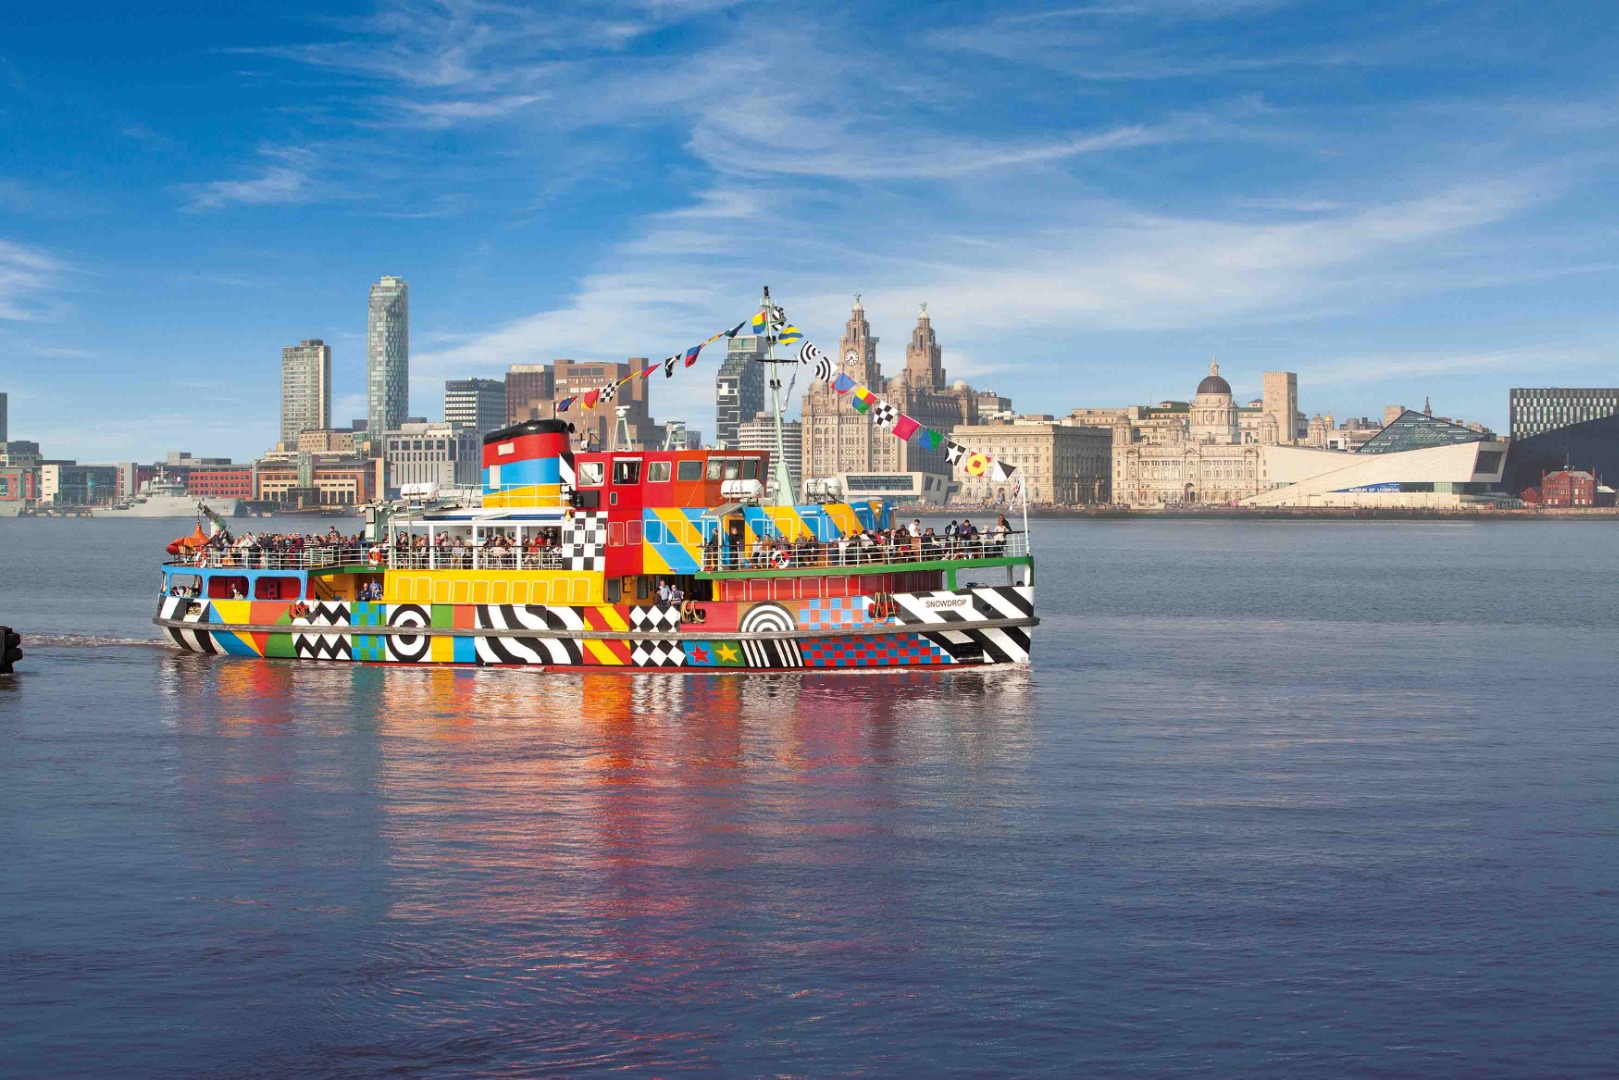 [SALE] Liverpool Mersey Ferries River Cruise, HopOn and Hopoff Tour